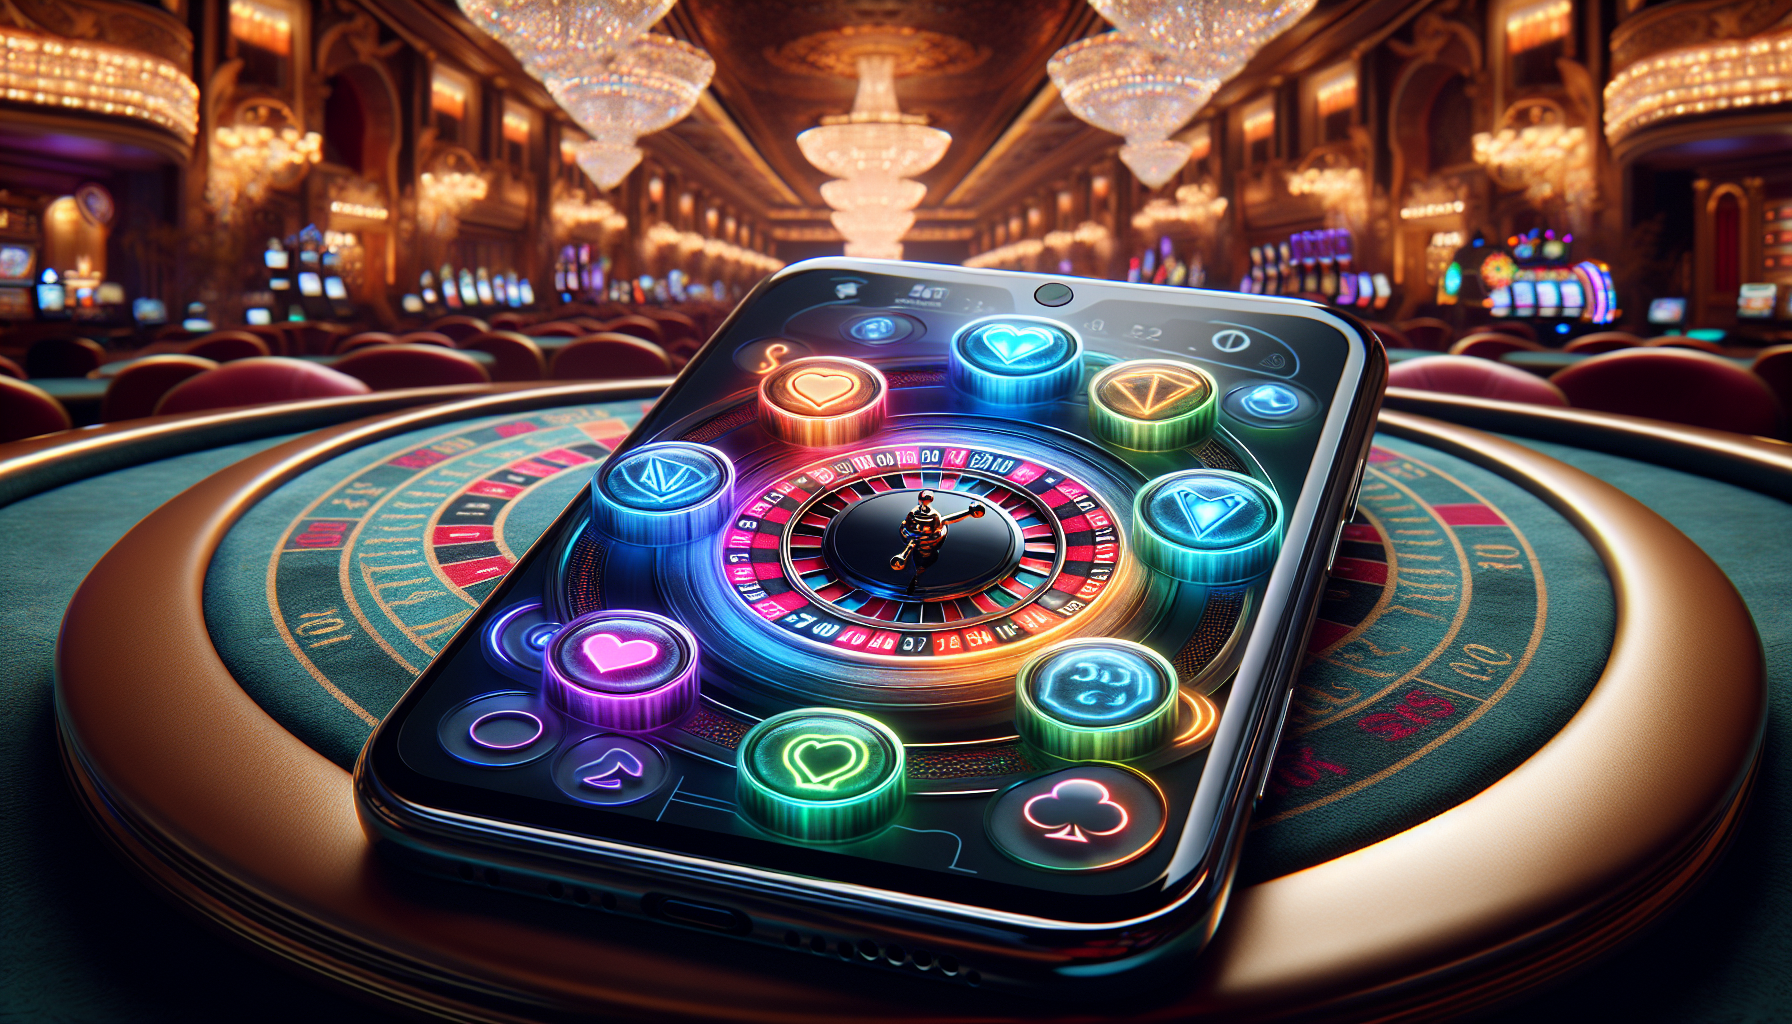 A variety of mobile casino apps on a smartphone screen